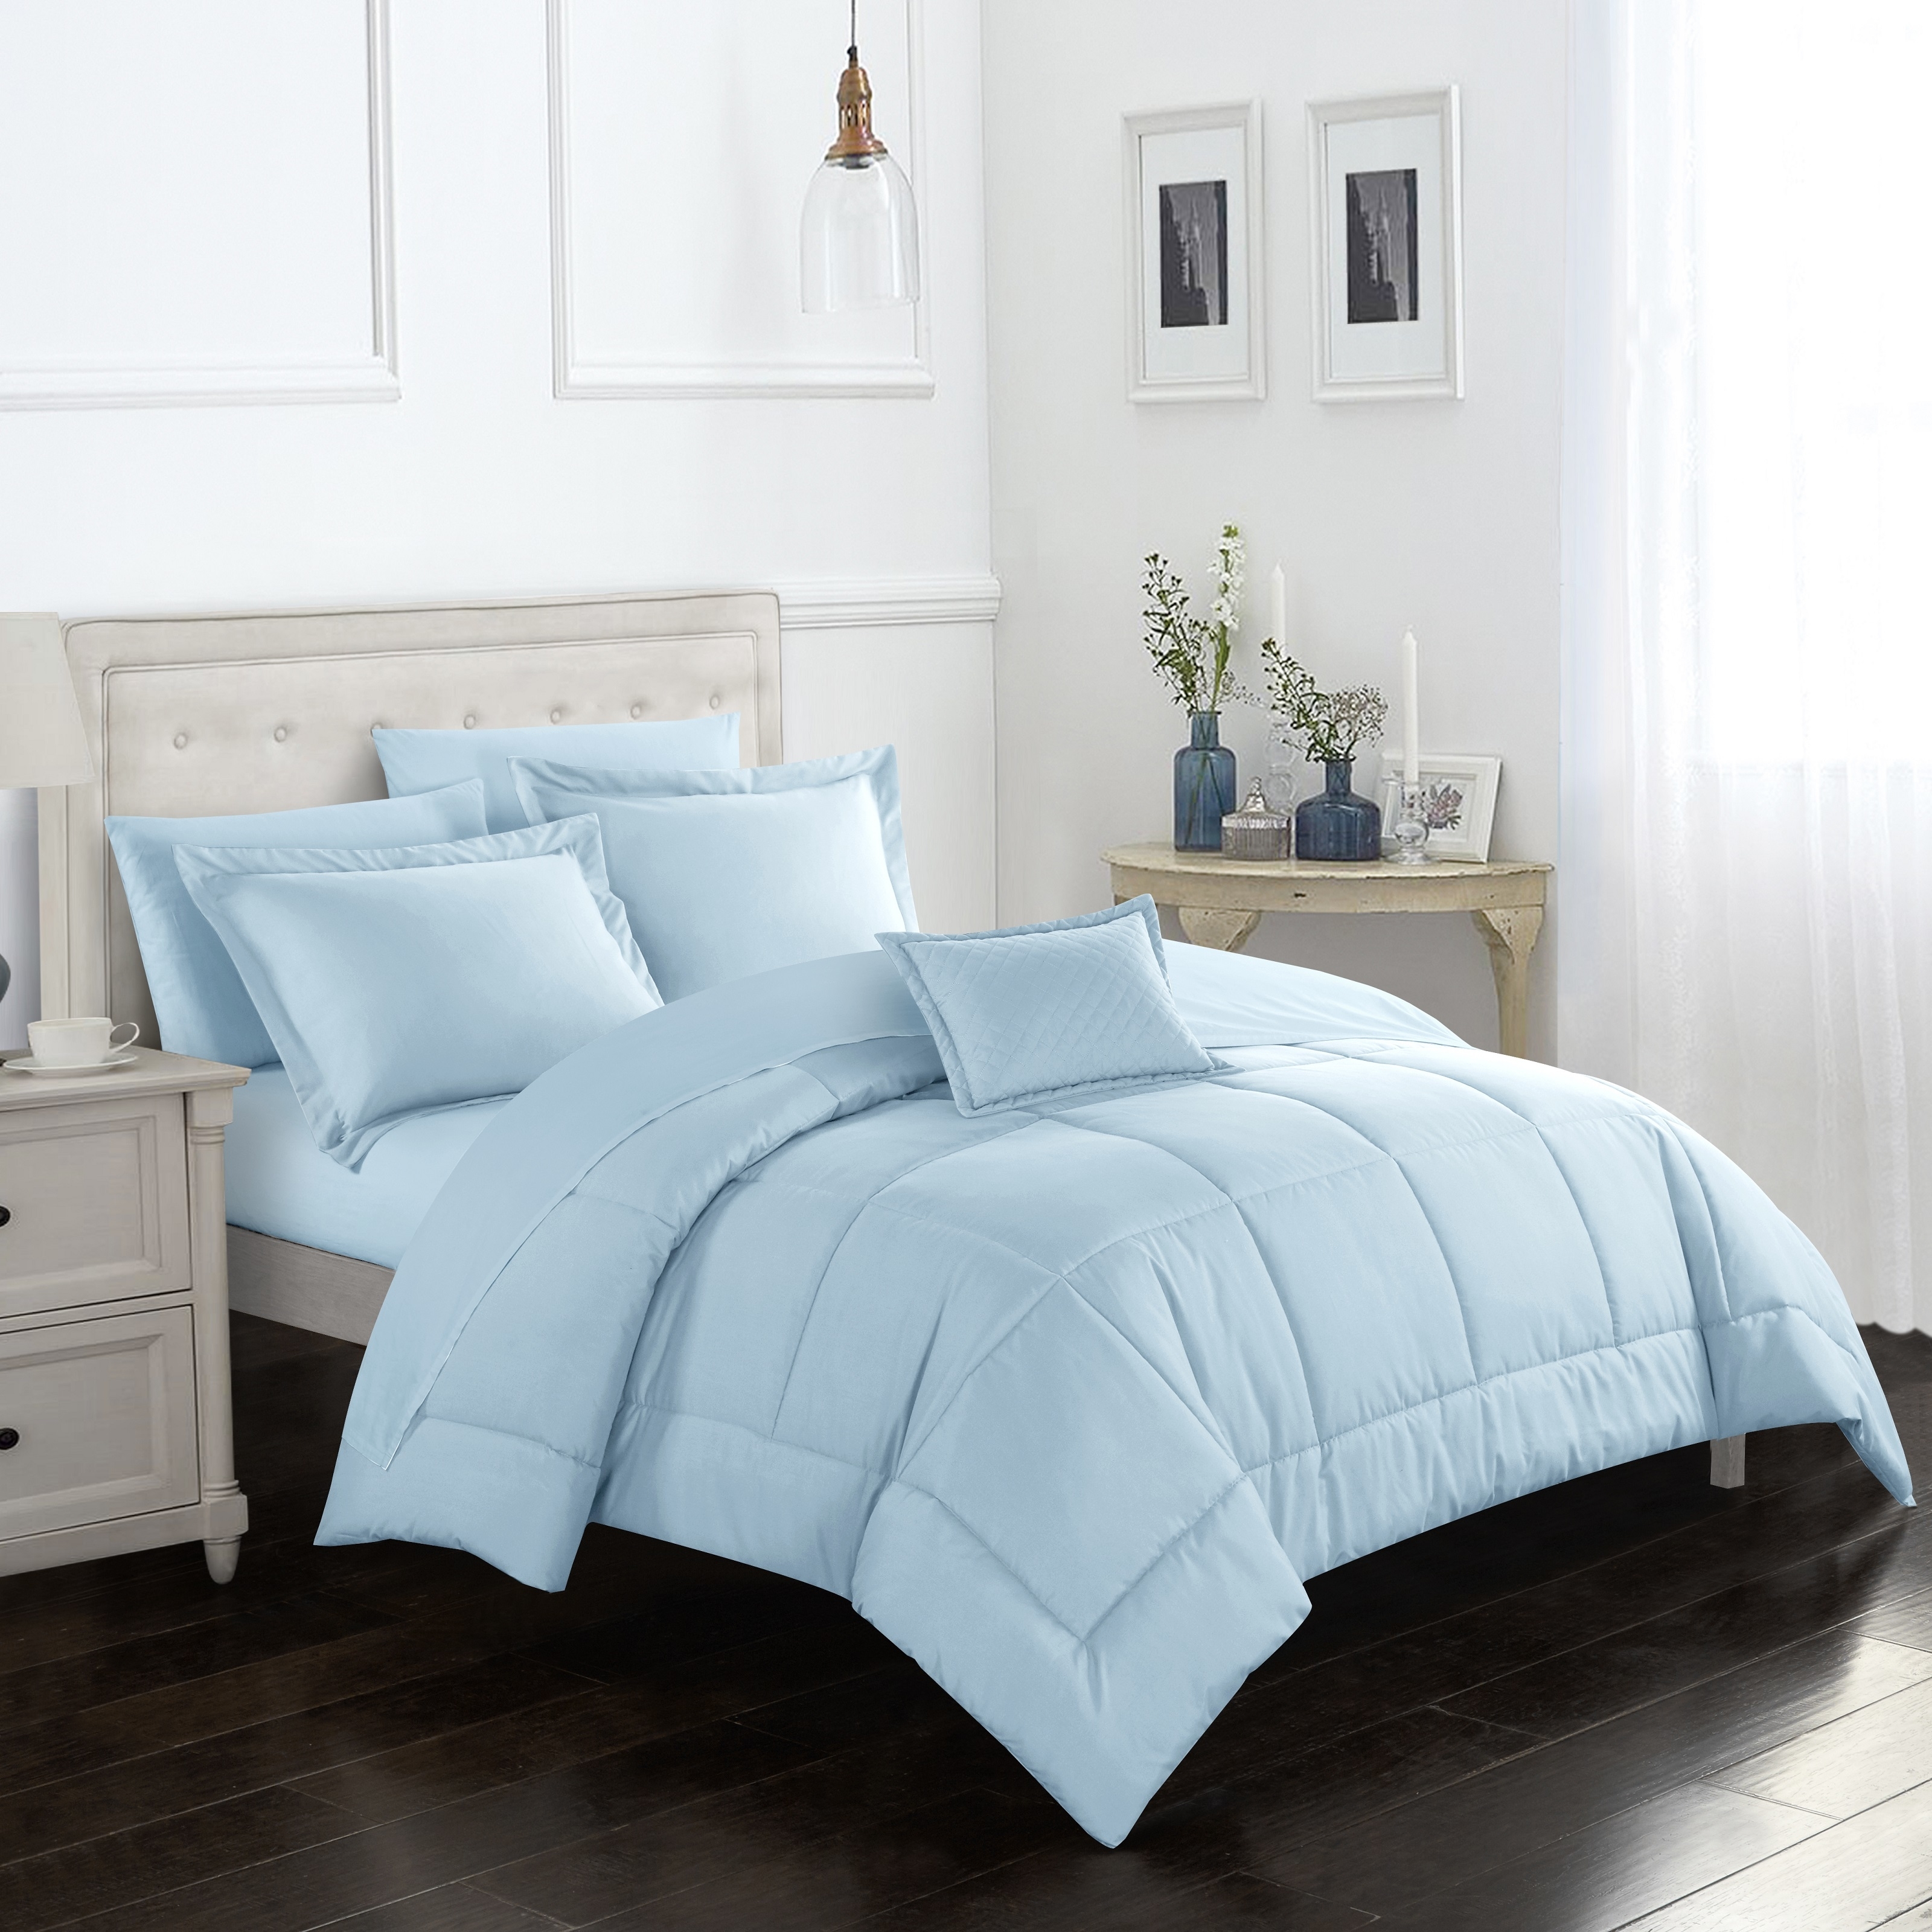 Joshuah 8 Piece Comforter Set Pieced Solid Color Stitched With Sheet Set - Blue, King